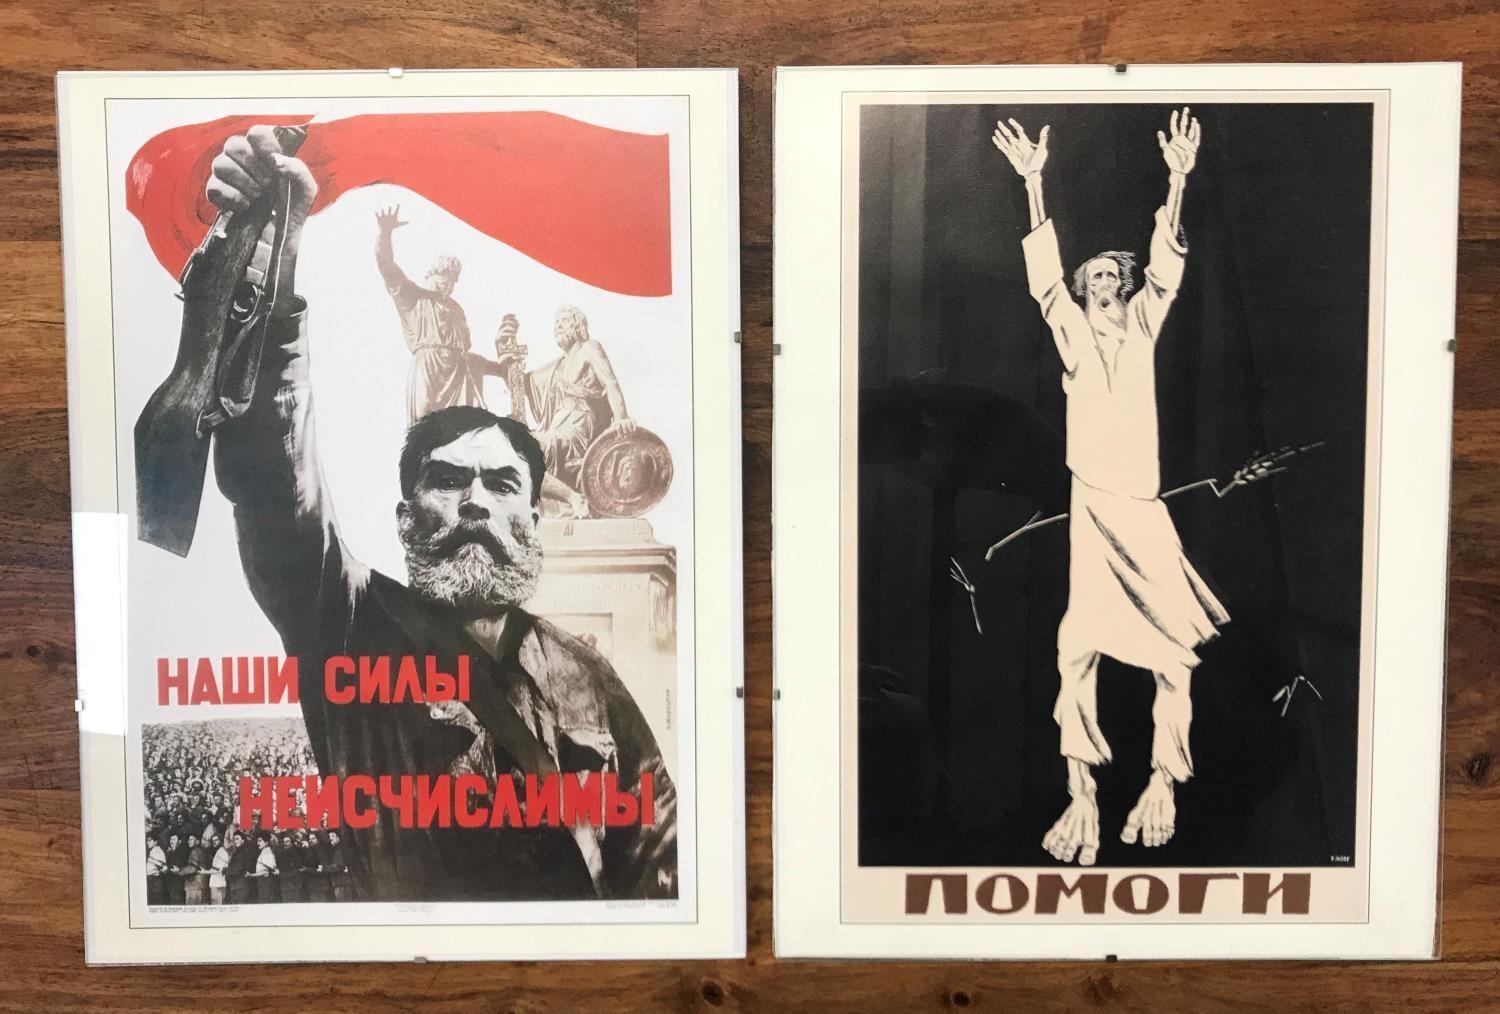 TWO REPRODUCTION RUSSIAN SOVIET ERA PROPOGANDA POSTERS one from 1921 referring to food shortages